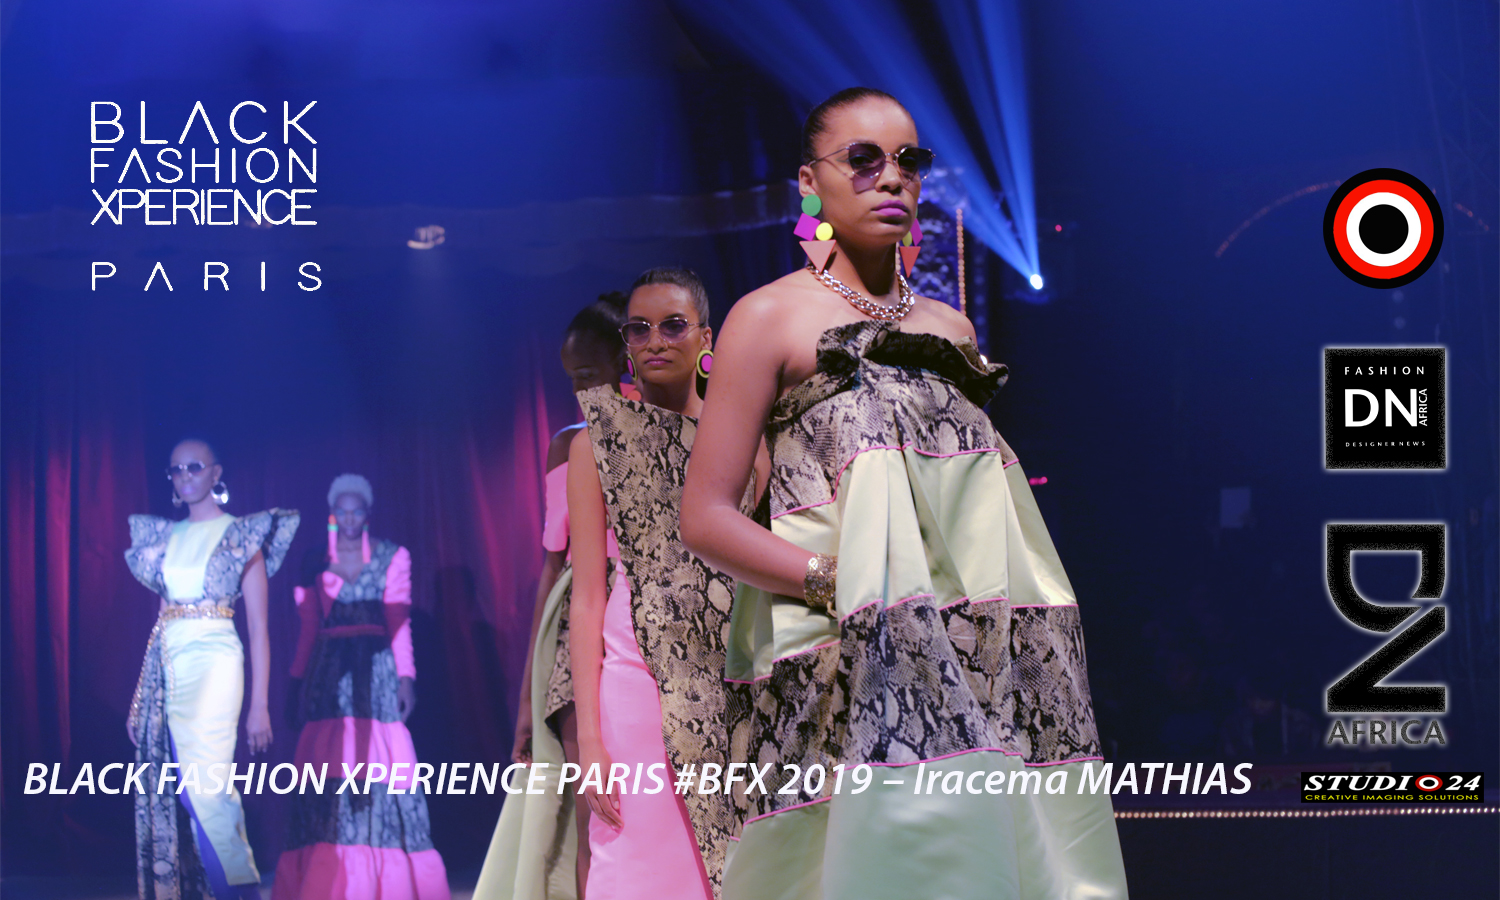 AFRICAN FASHION STYLE MAGAZINE - Black-Fashion-Xperience-2019-Adama-Paris - Designer Iracema MATHIAS - Model Dorinex Longin Mboumba - PR Indirâh Events and Communication - Photographer DAN NGU - Official Media Partner DN AFRICA - STUDIO 24 NIGERIA - STUDIO 24 INTERNATIONAL - Ifeanyi Christopher Oputa MD AND CEO OF COLVI LIMITED AND STUDIO 24 - CHEVEUX CHERIE and CHEVEUX CHERIE STUDIO BY MARIEME DUBOZ- Fashion Editor Nahomie NOOR COULIBALY